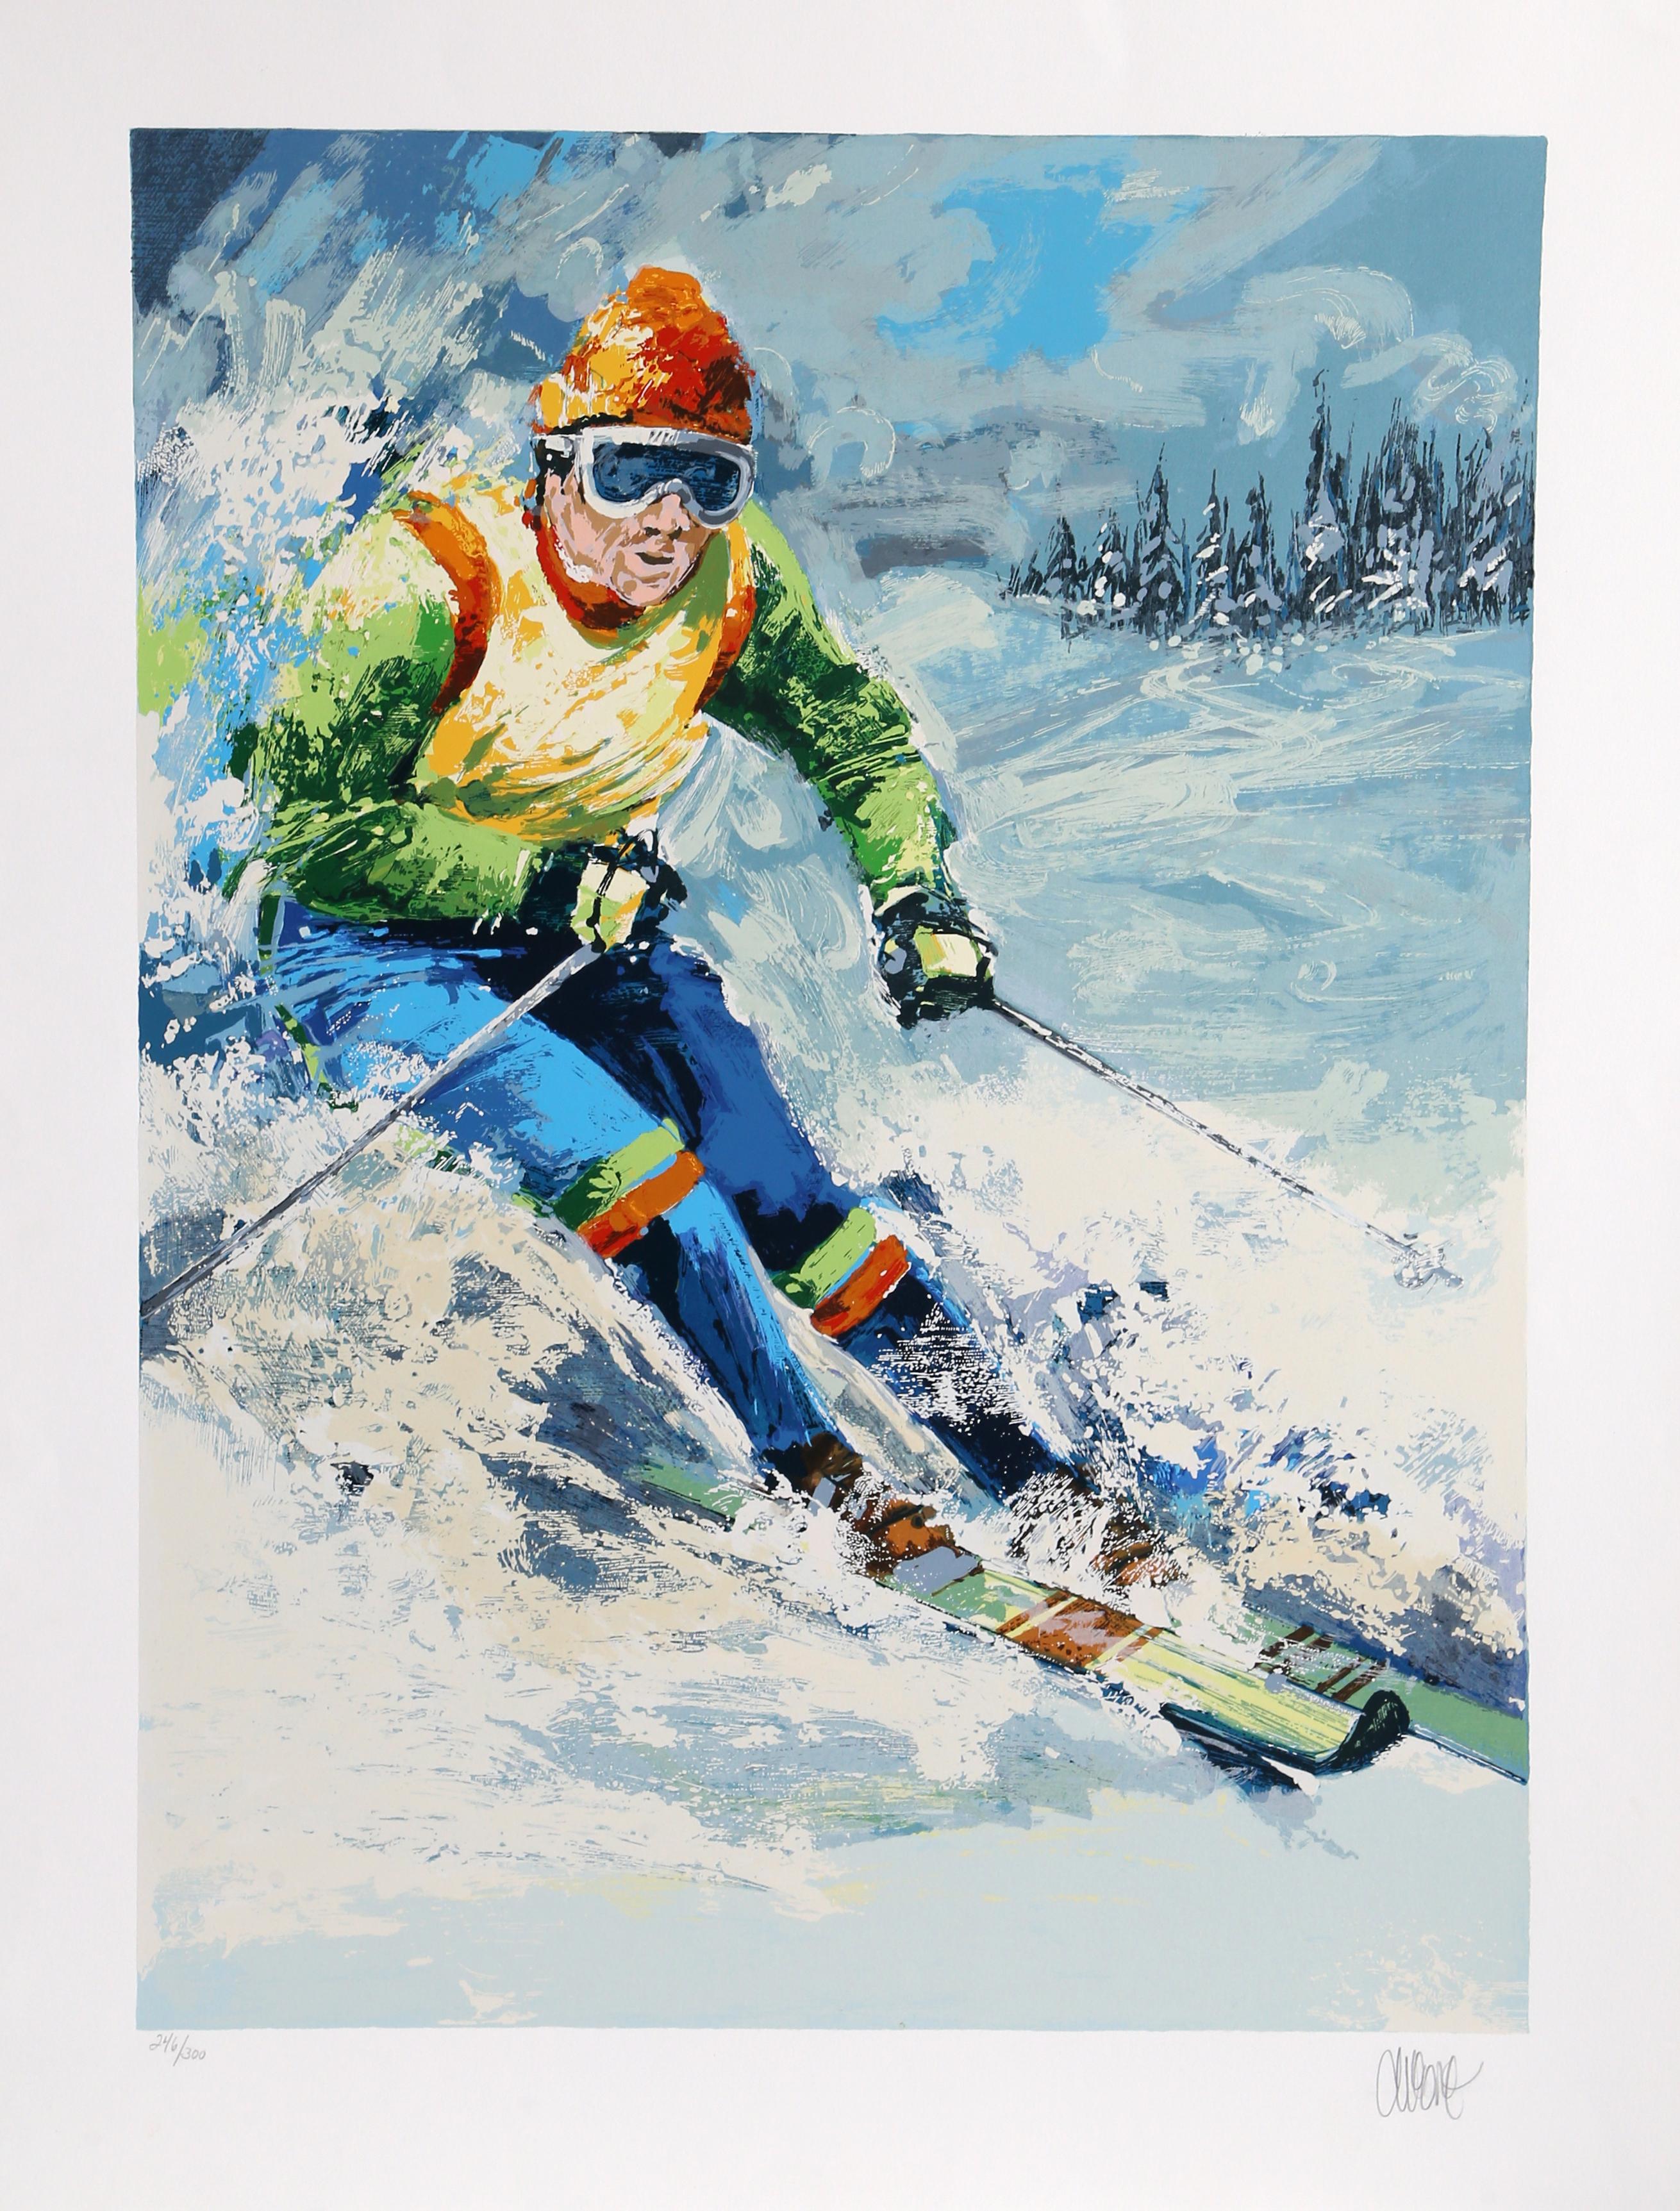 Skier I
Wayland Moore, American (1935)
Date: circa 1980
Screenprint, signed and numbered in pencil
Edition of 246/300
Image Size: 29.5 x 21 inches
Size: 36 x 27.5 in. (91.44 x 69.85 cm)